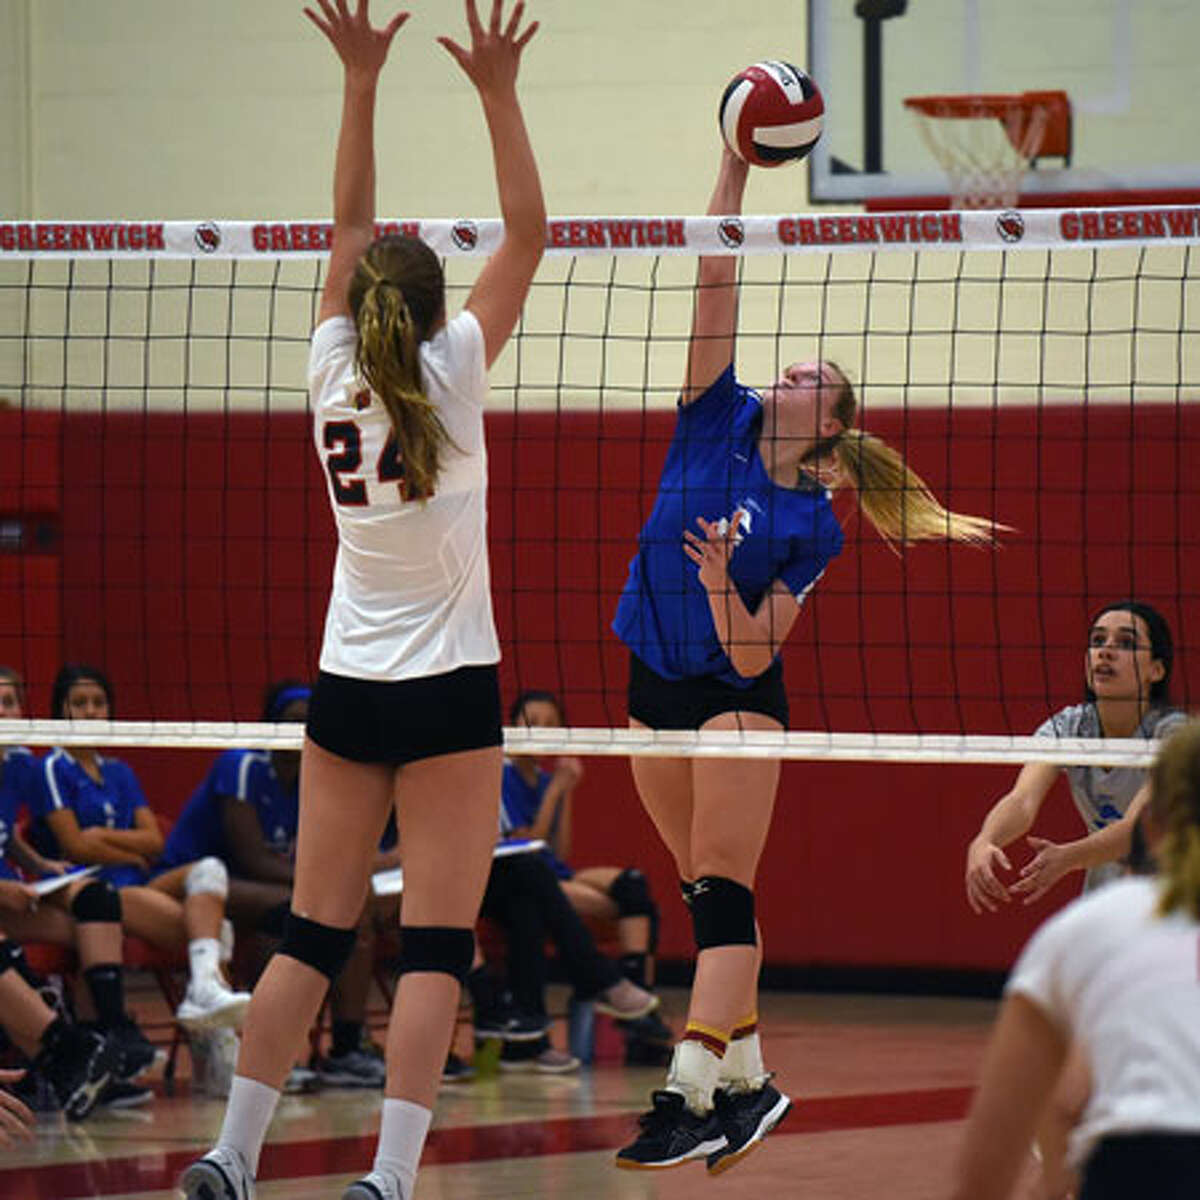 Darien senior co-captain Lindsay Bennett puts down a point during the Wave's 3-0 win over Greenwich in the FCIAC quarterfinals on Tuesday. — Dave Stewart photo